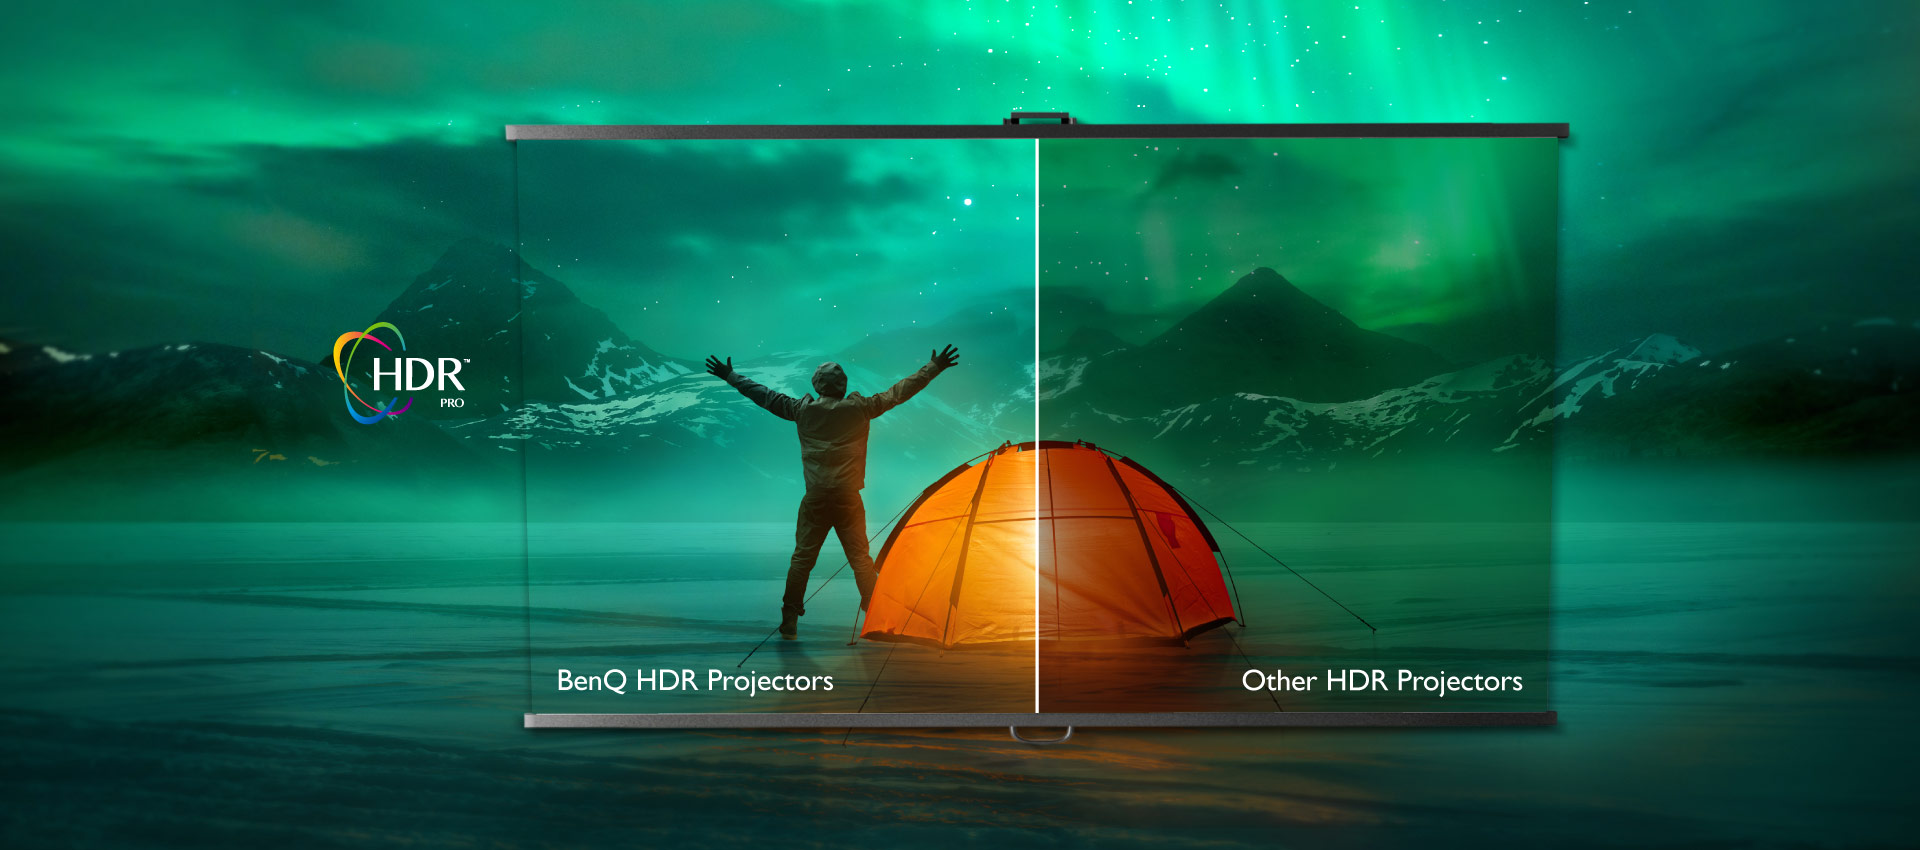 HDR-PRO offers greater brightness, contrast range